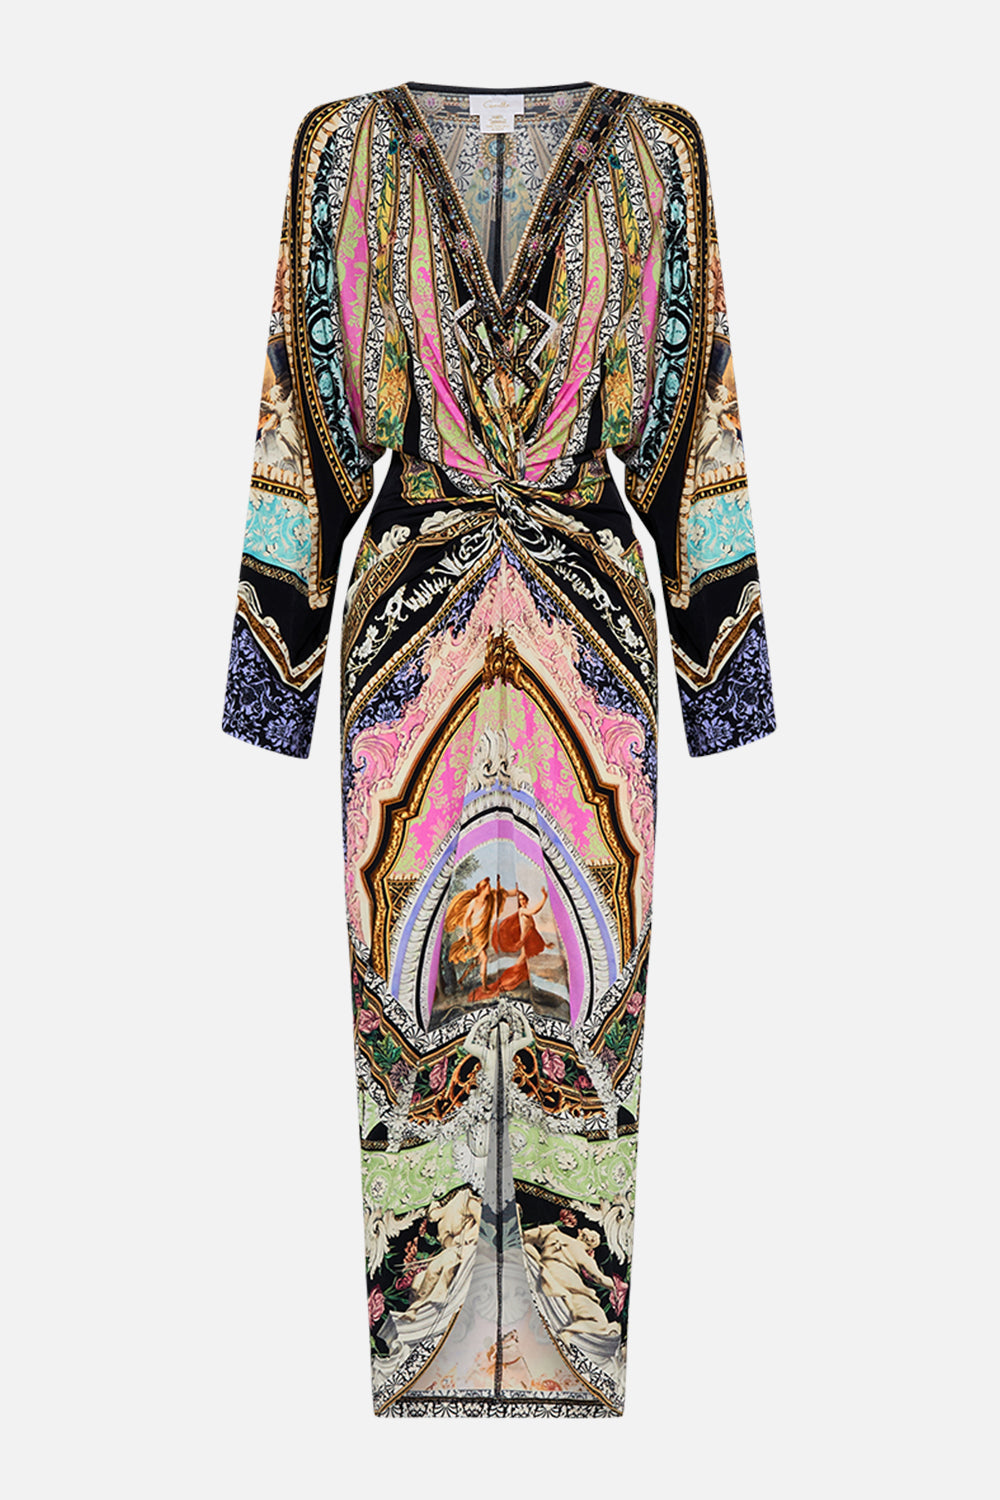 CAMILLA twist front jersey dress in Florence Field Day print